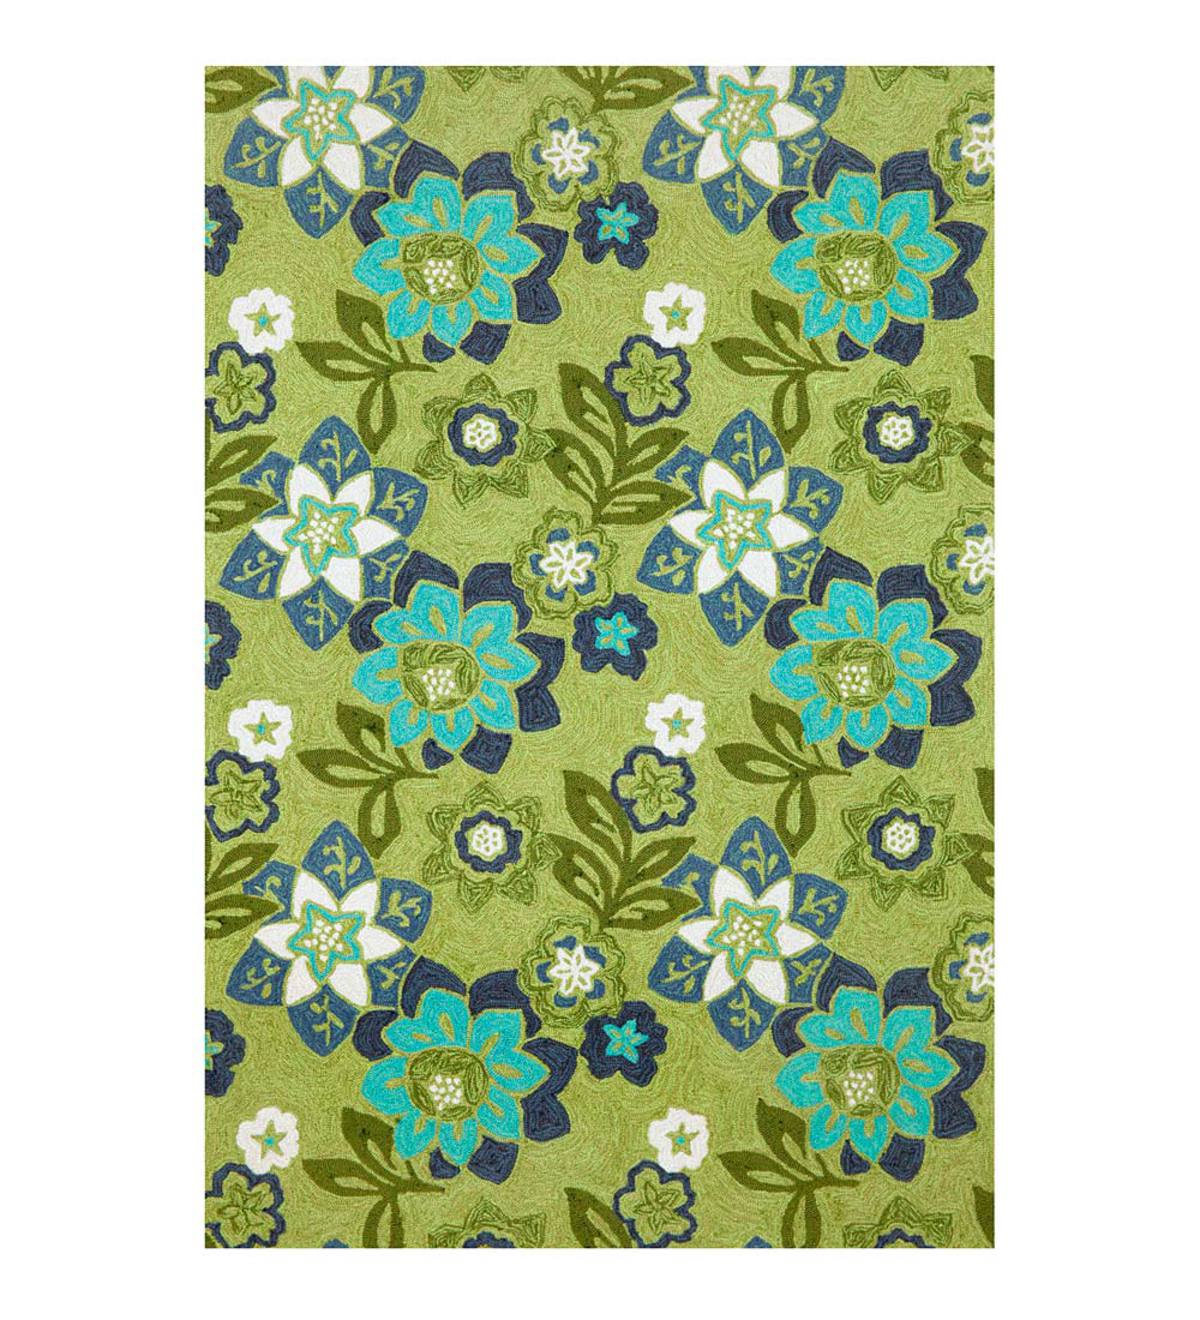 Blue and Green Floral Accent Rug, 8'3"W x 11'6"L